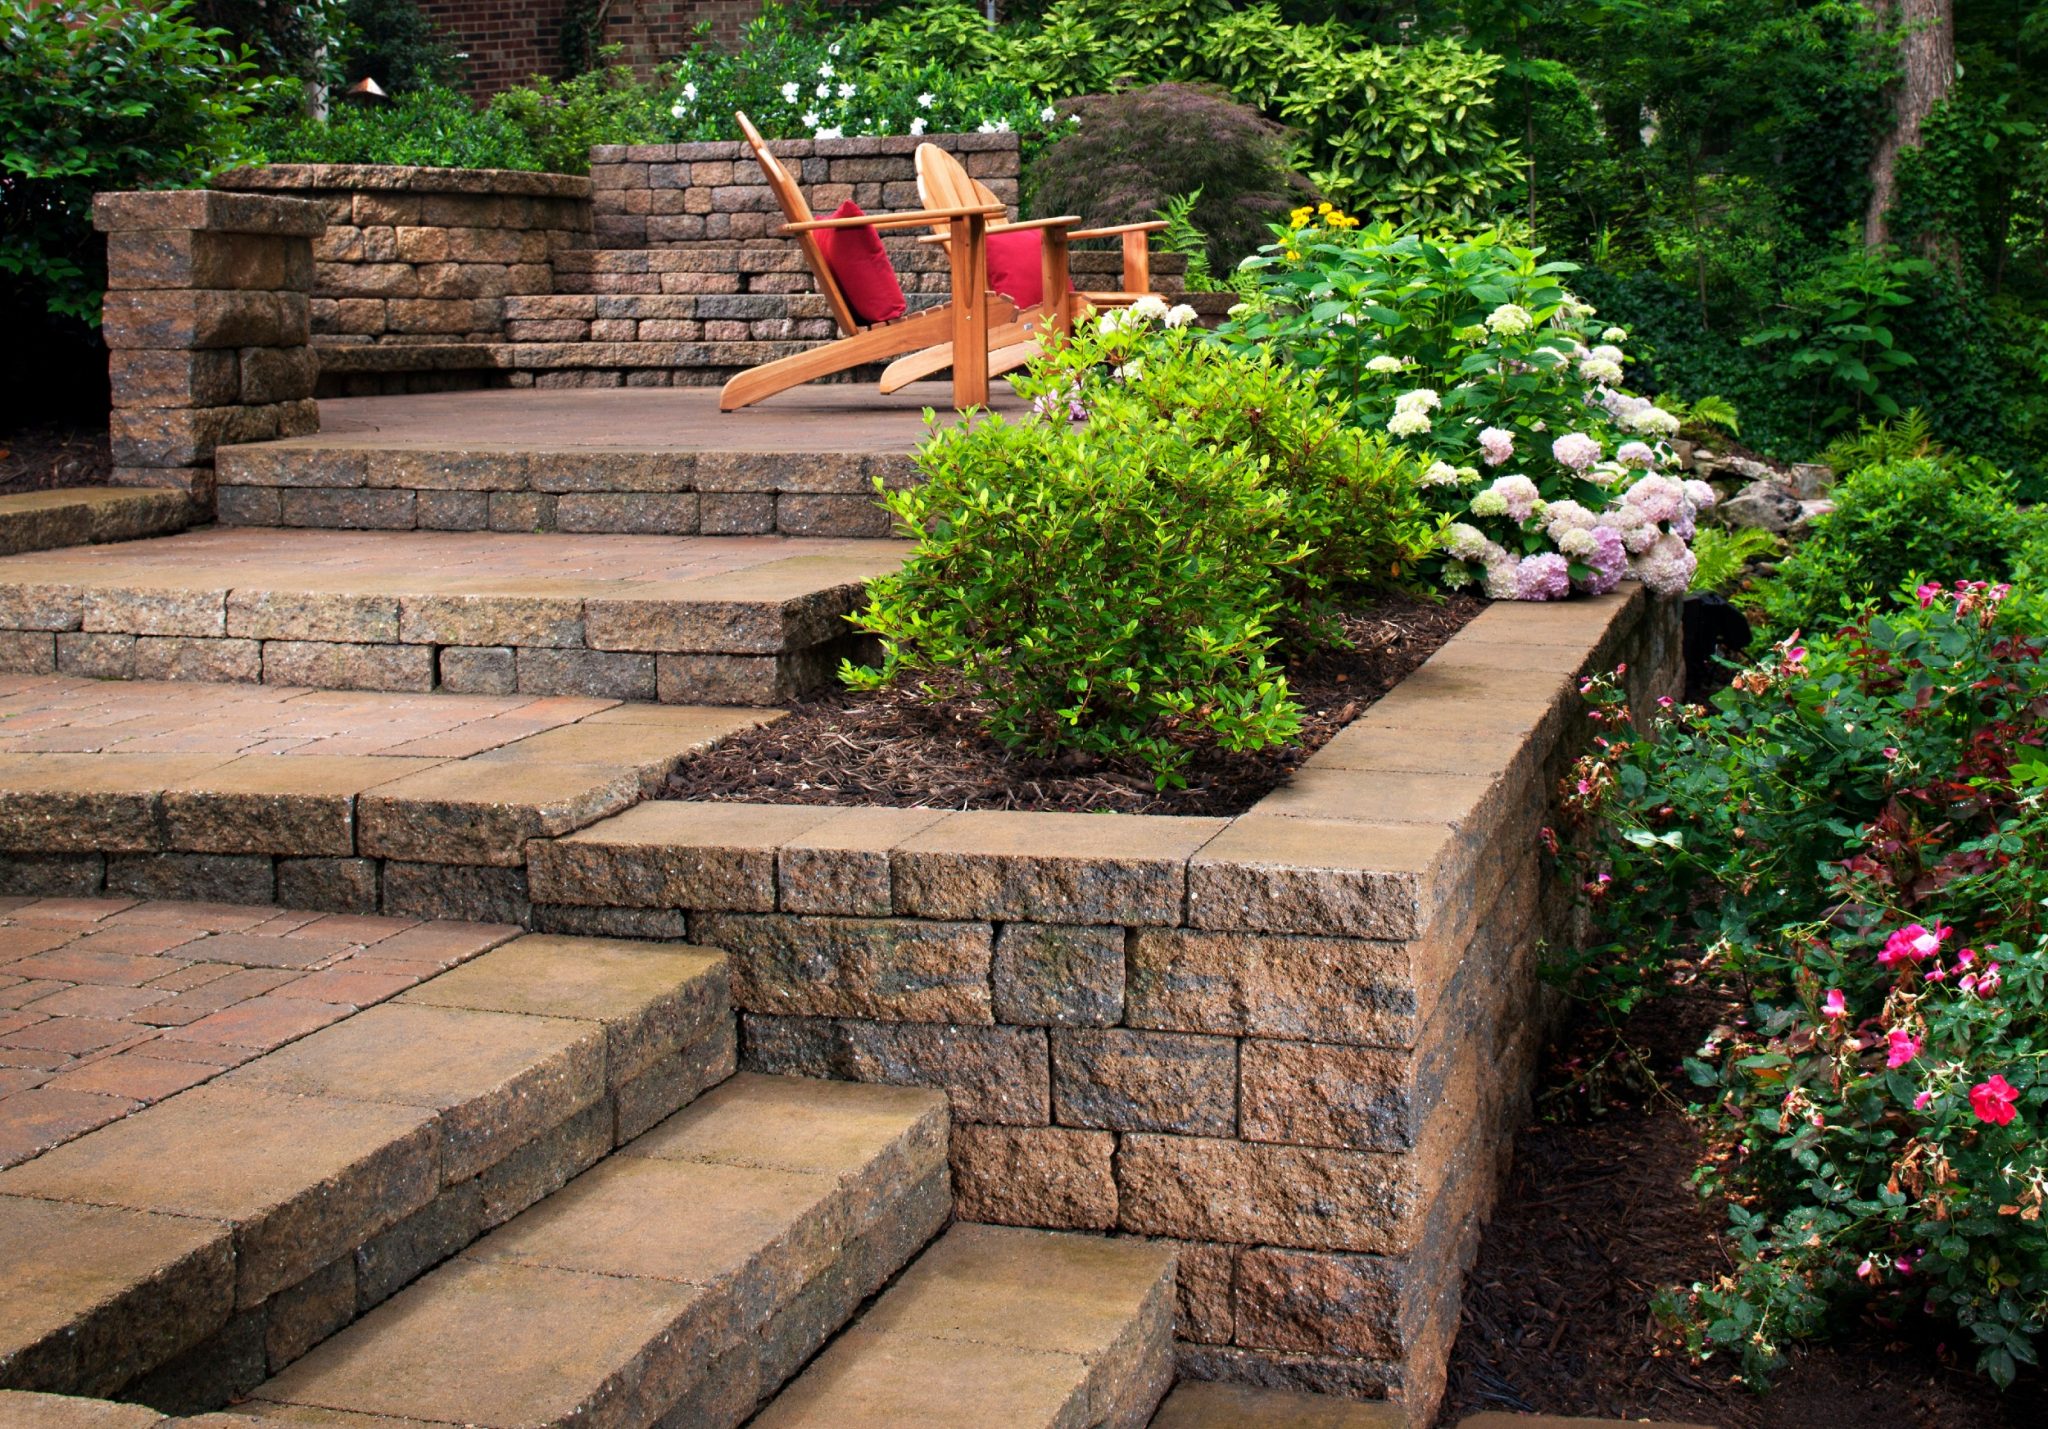  landscaping wall ideas pictures